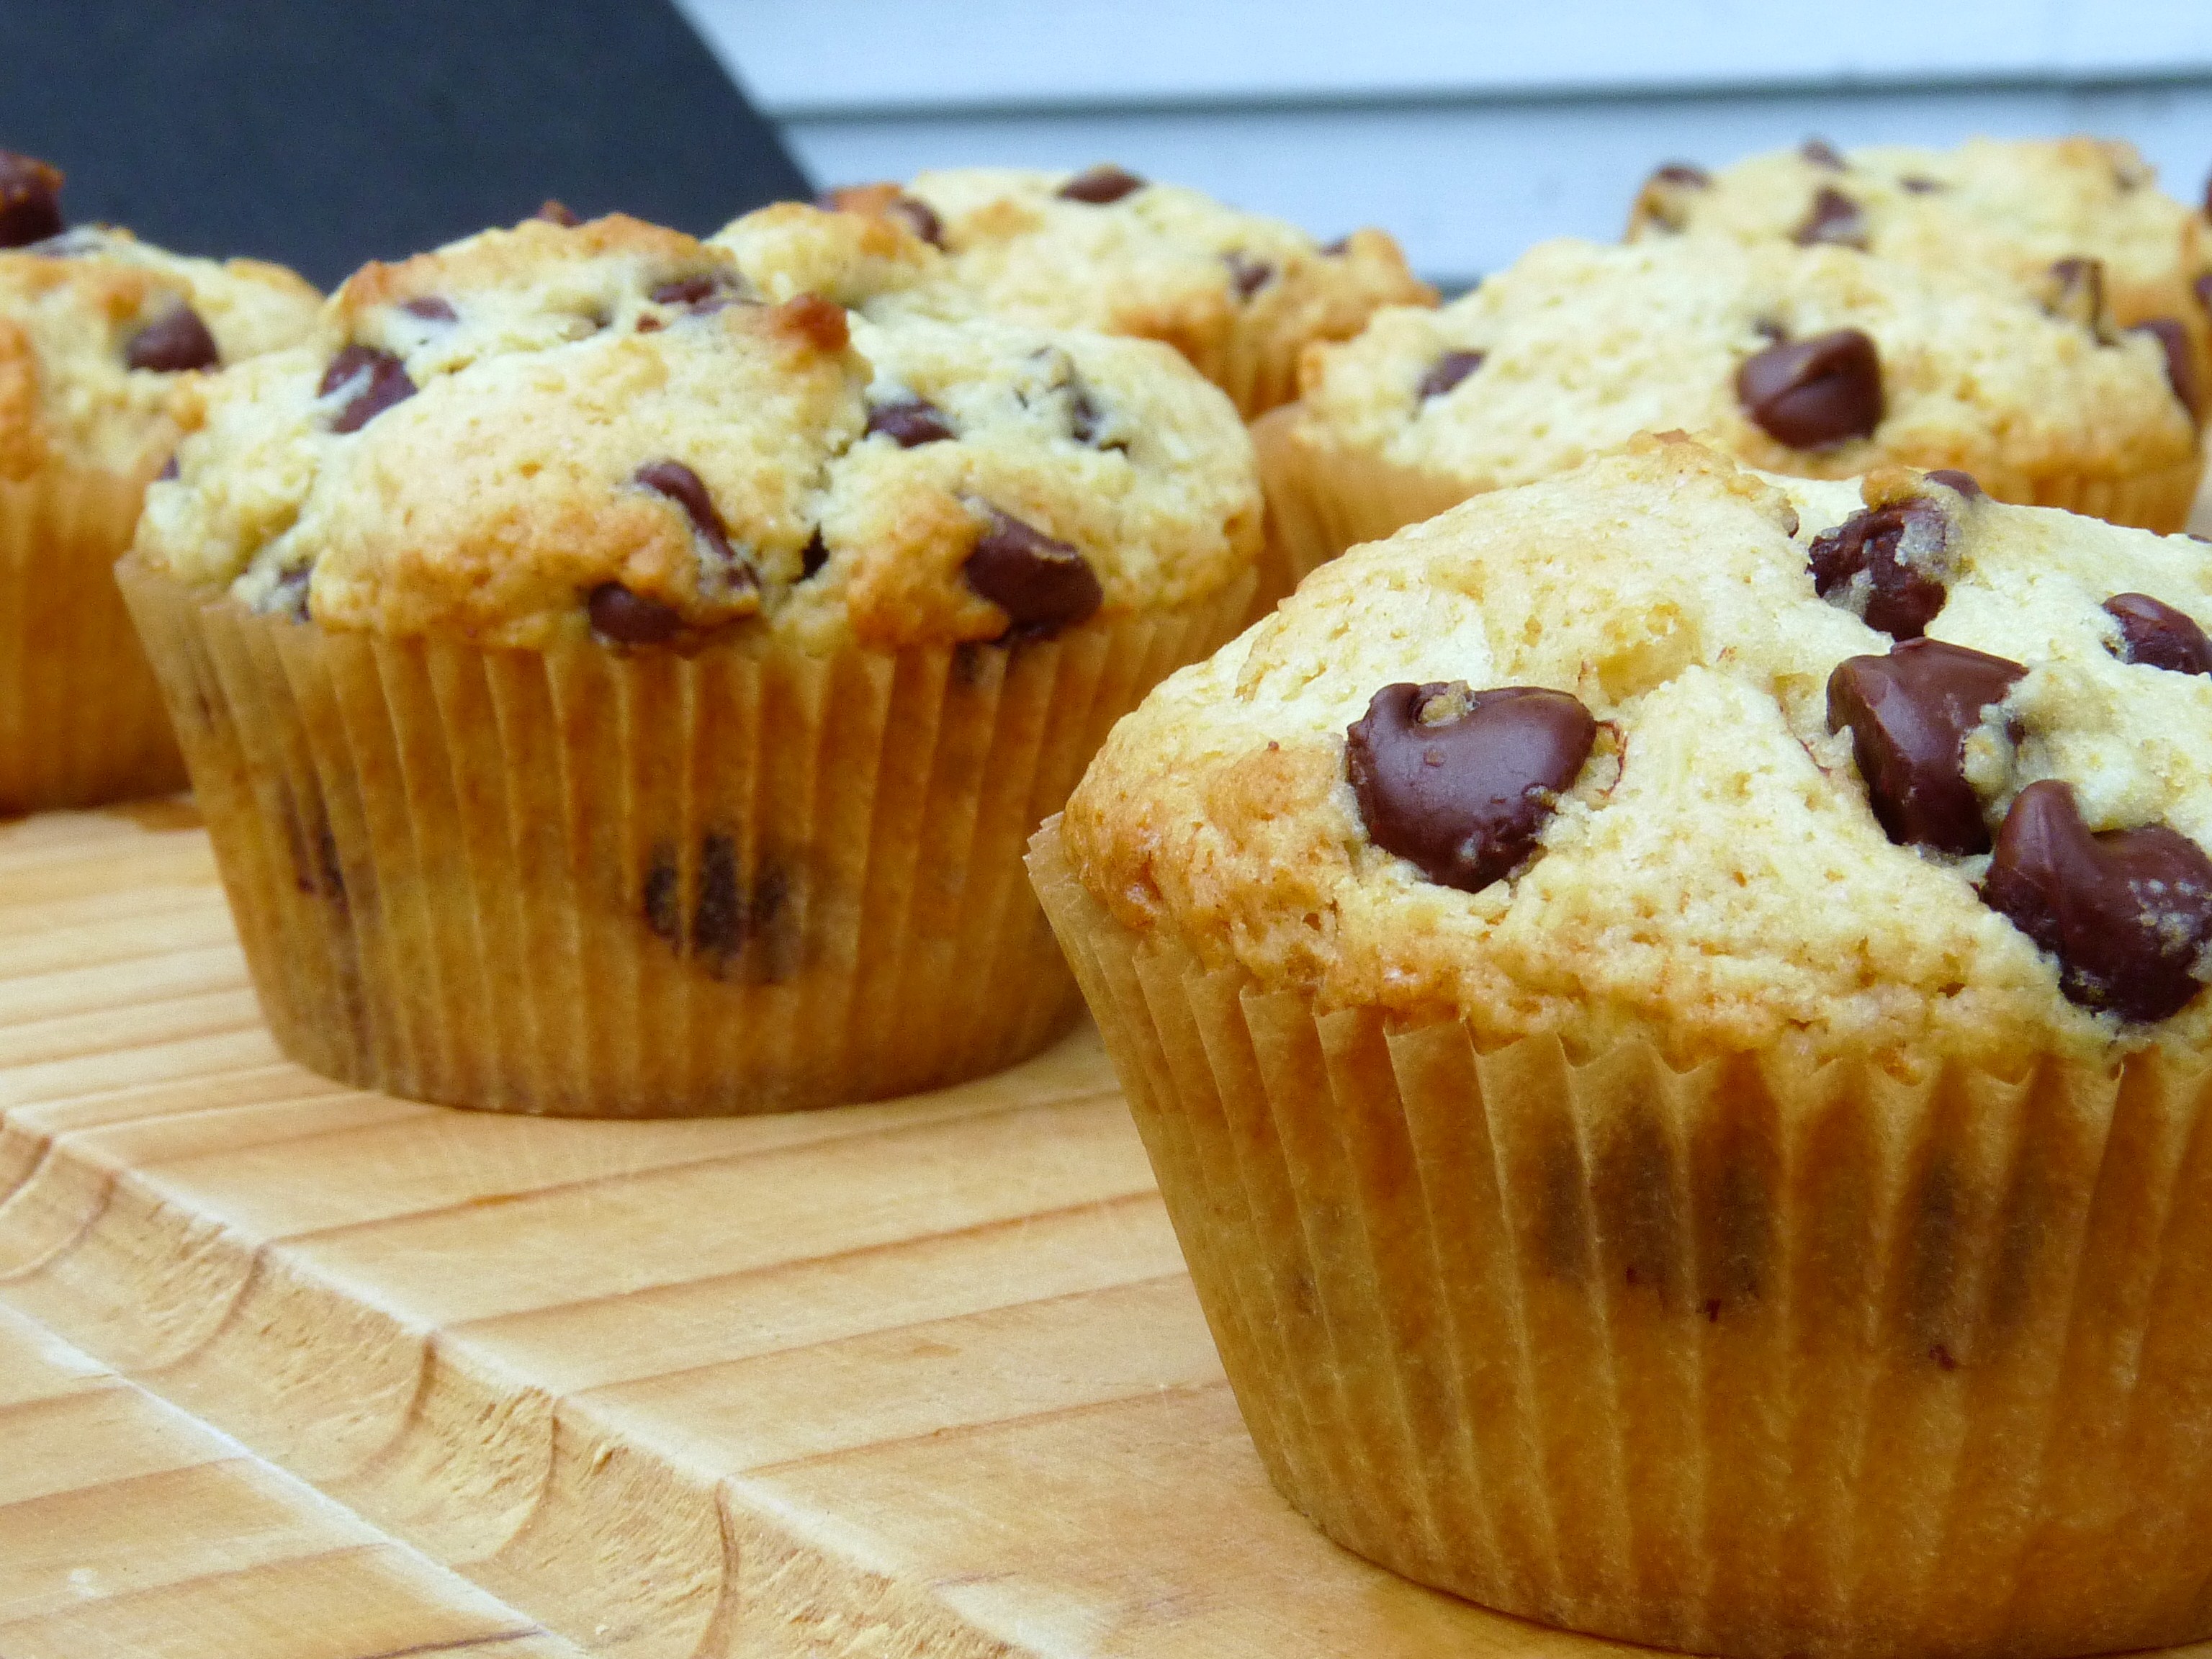 life needs sweets: Chocolate Chip Muffins